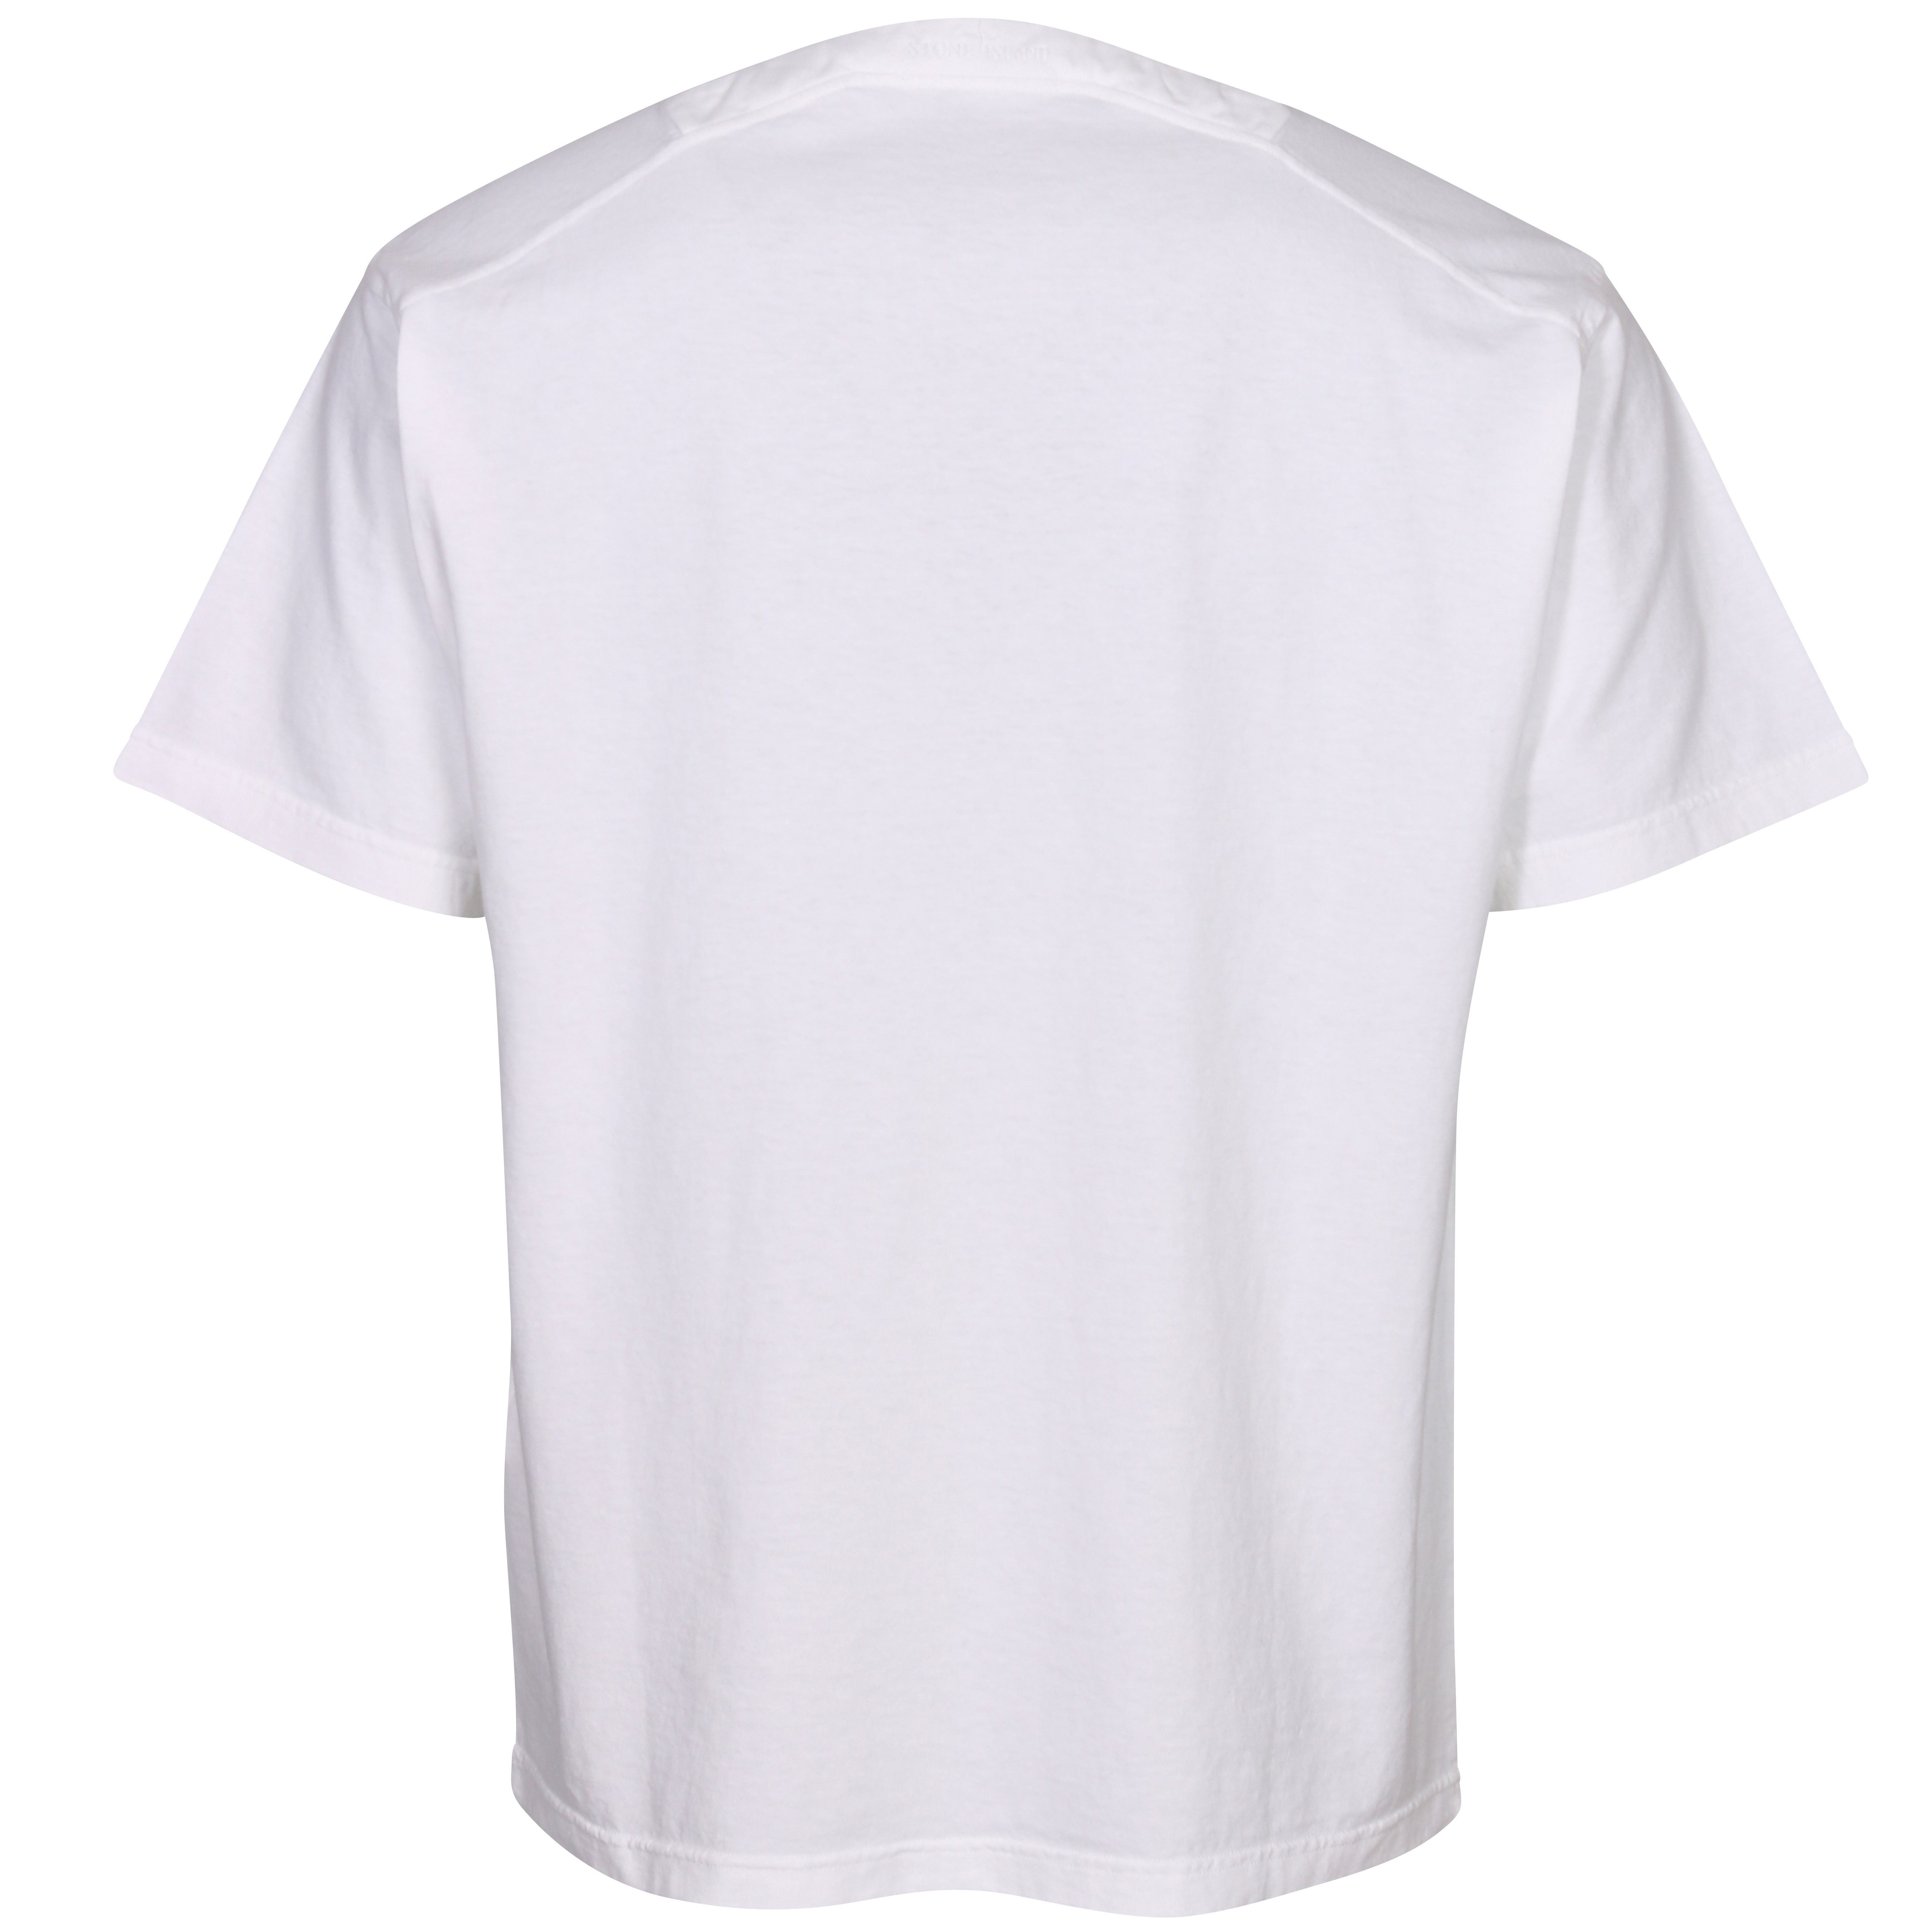 Stone Island Oversized T-Shirt in White L